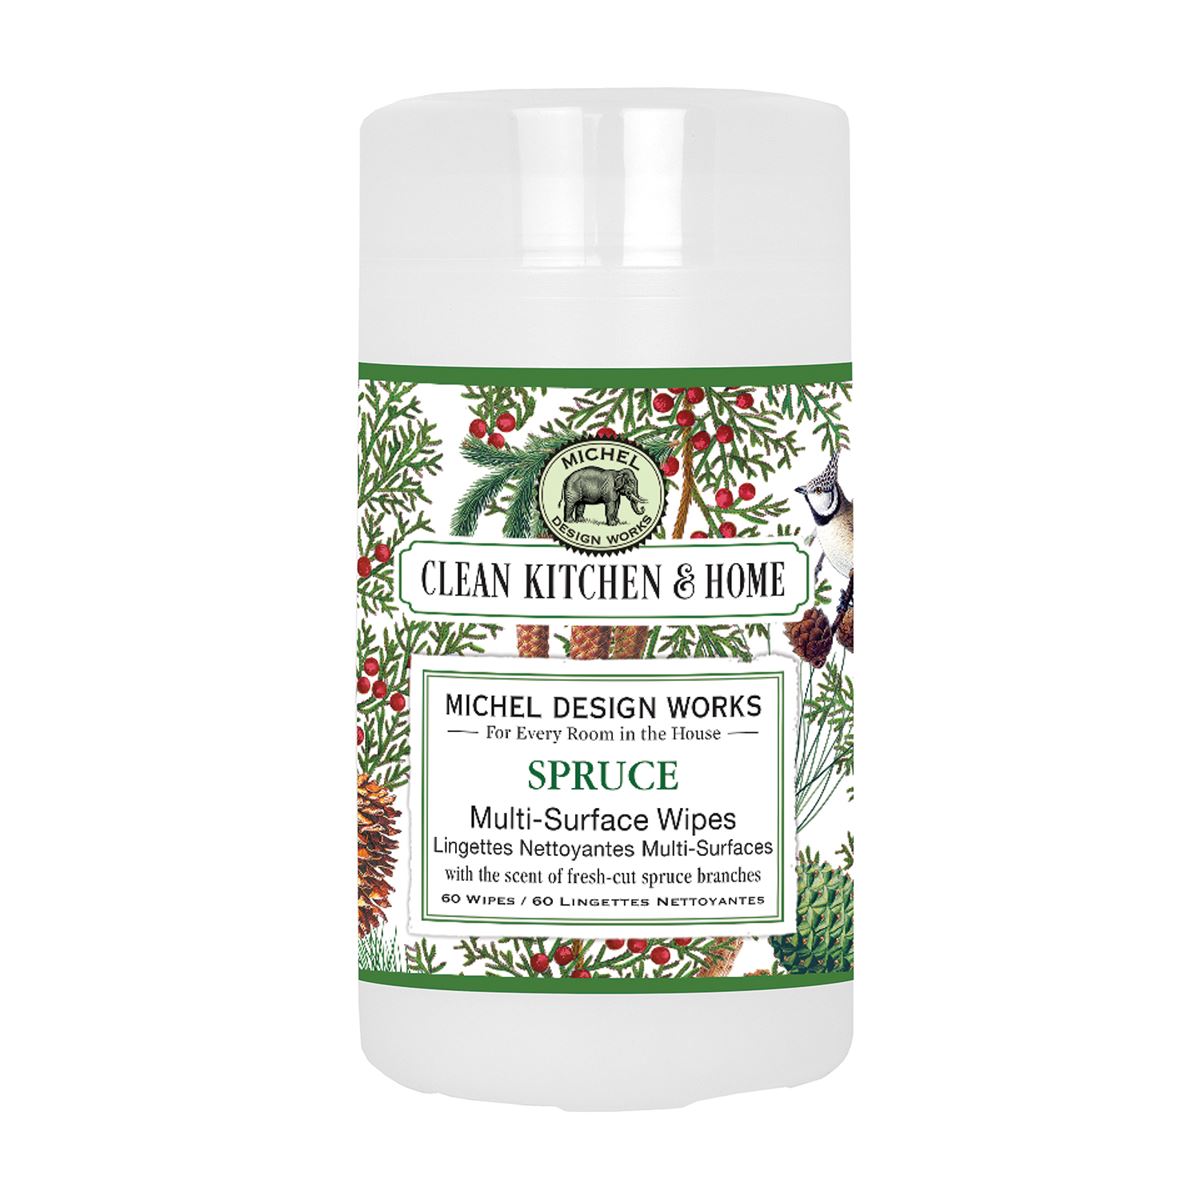 Multi-Surface Wipes - Spruce